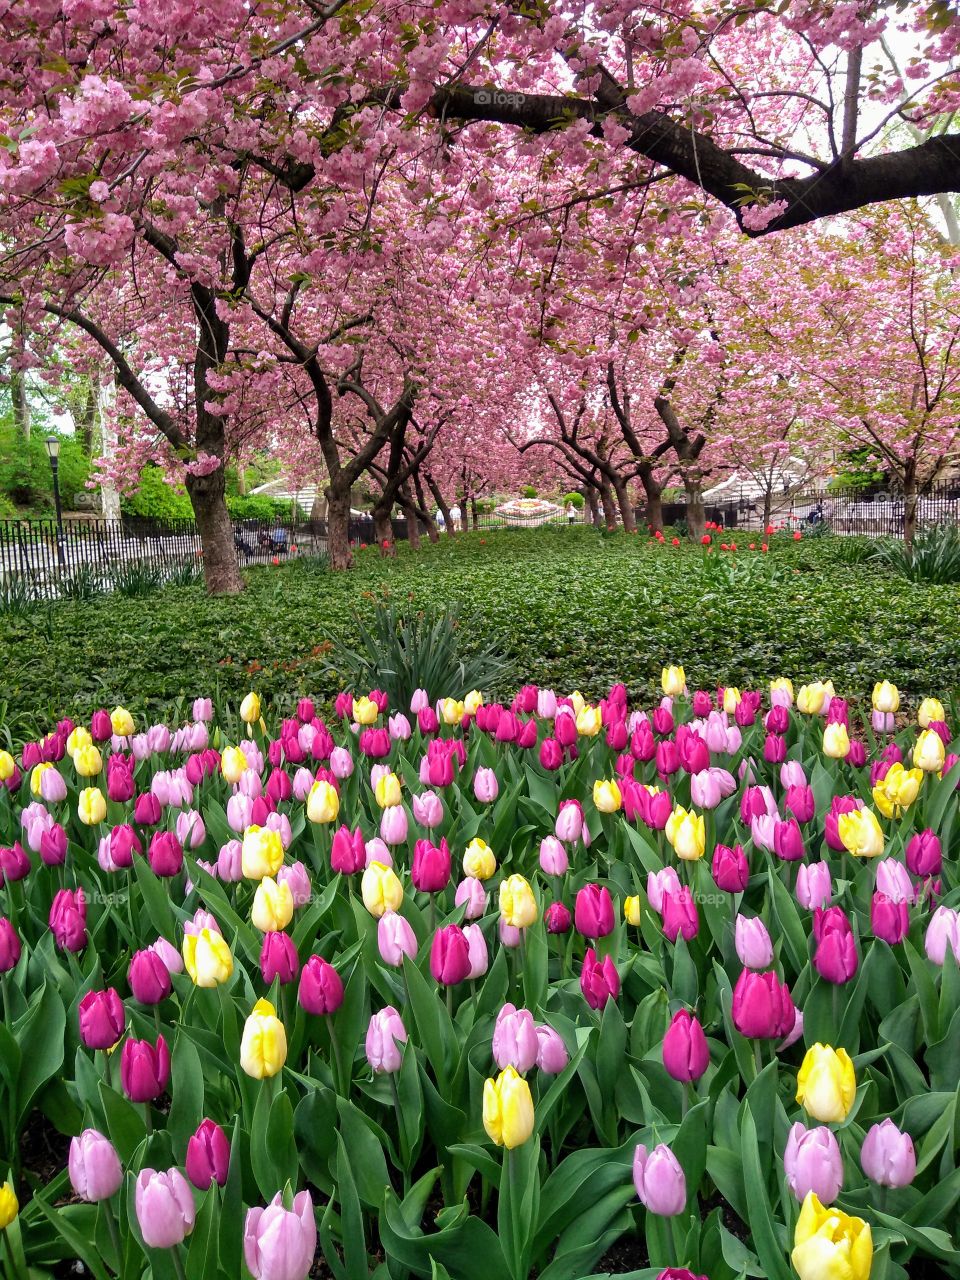 Tulips and Flowering Trees NYC Park